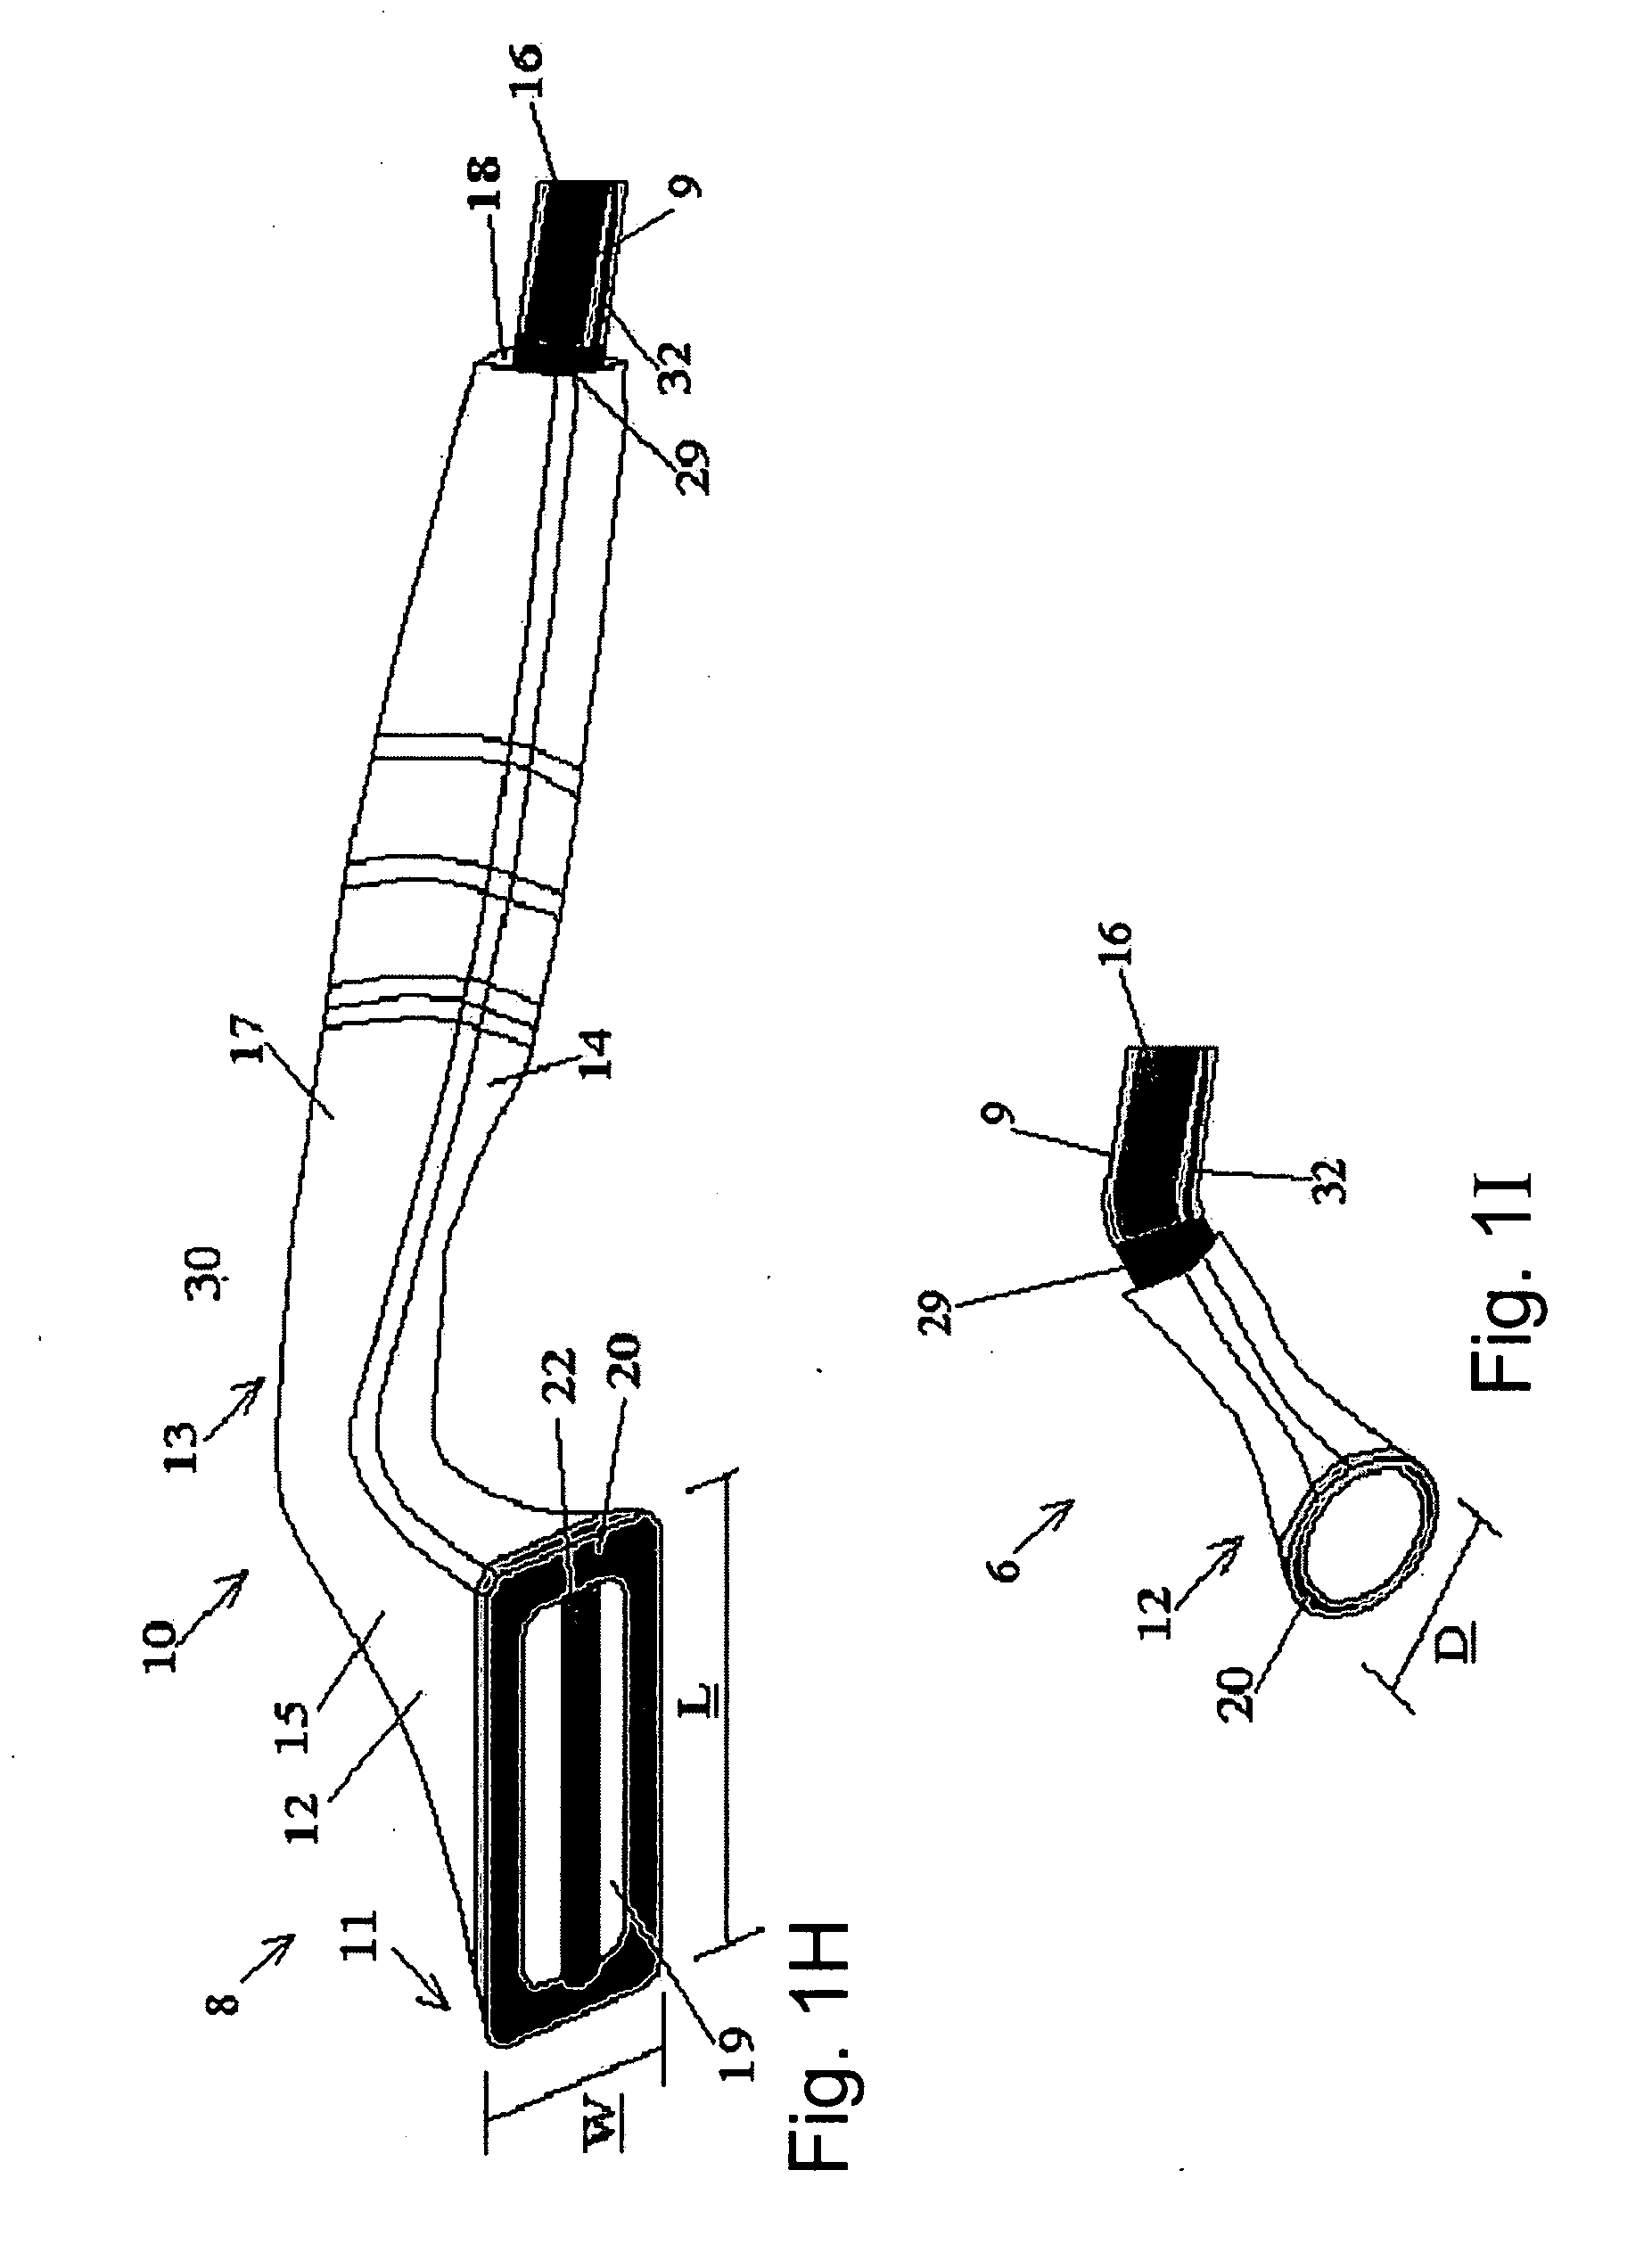 System and method for face and body treatment